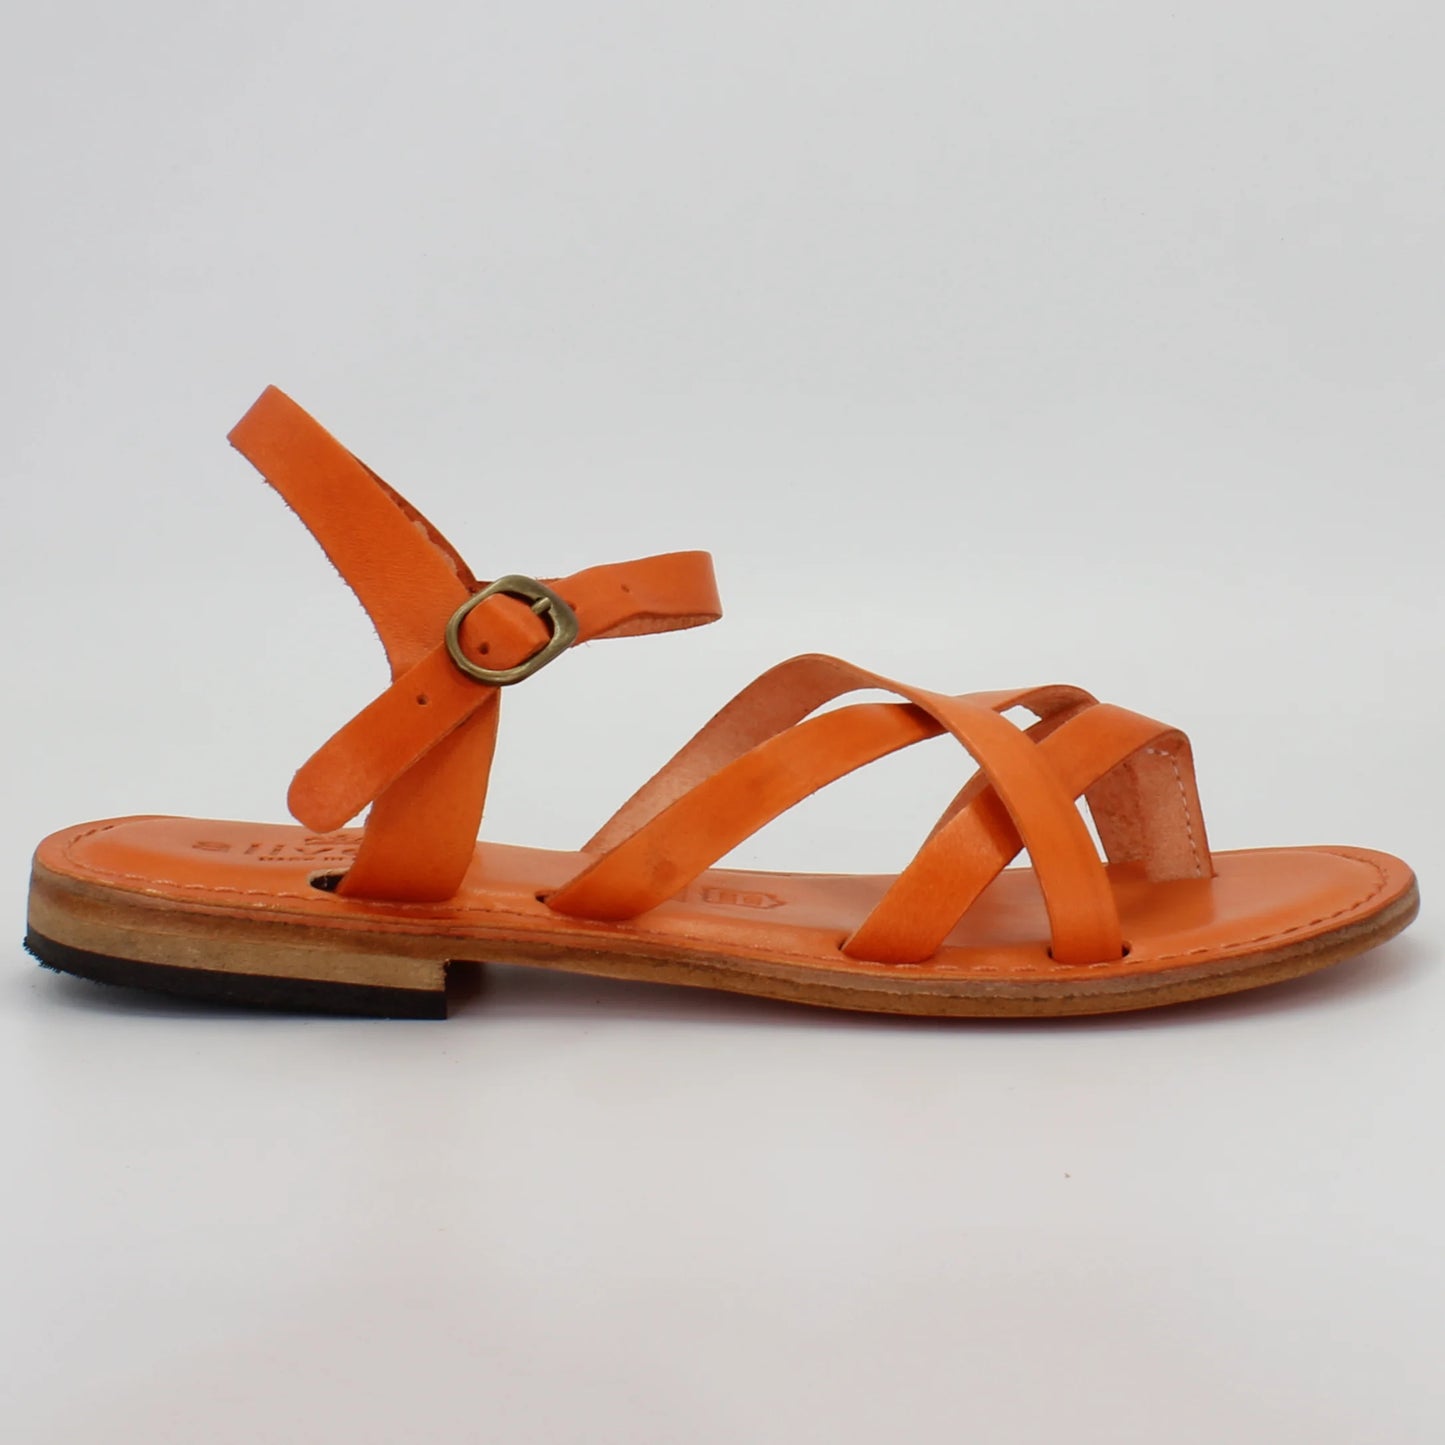 Shop Handmade Italian Leather sandal in arancio (1530) or browse our range of hand-made Italian shoes in leather or suede in-store at Aliverti Cape Town, or shop online. We deliver in South Africa & offer multiple payment plans as well as accept multiple safe & secure payment methods.